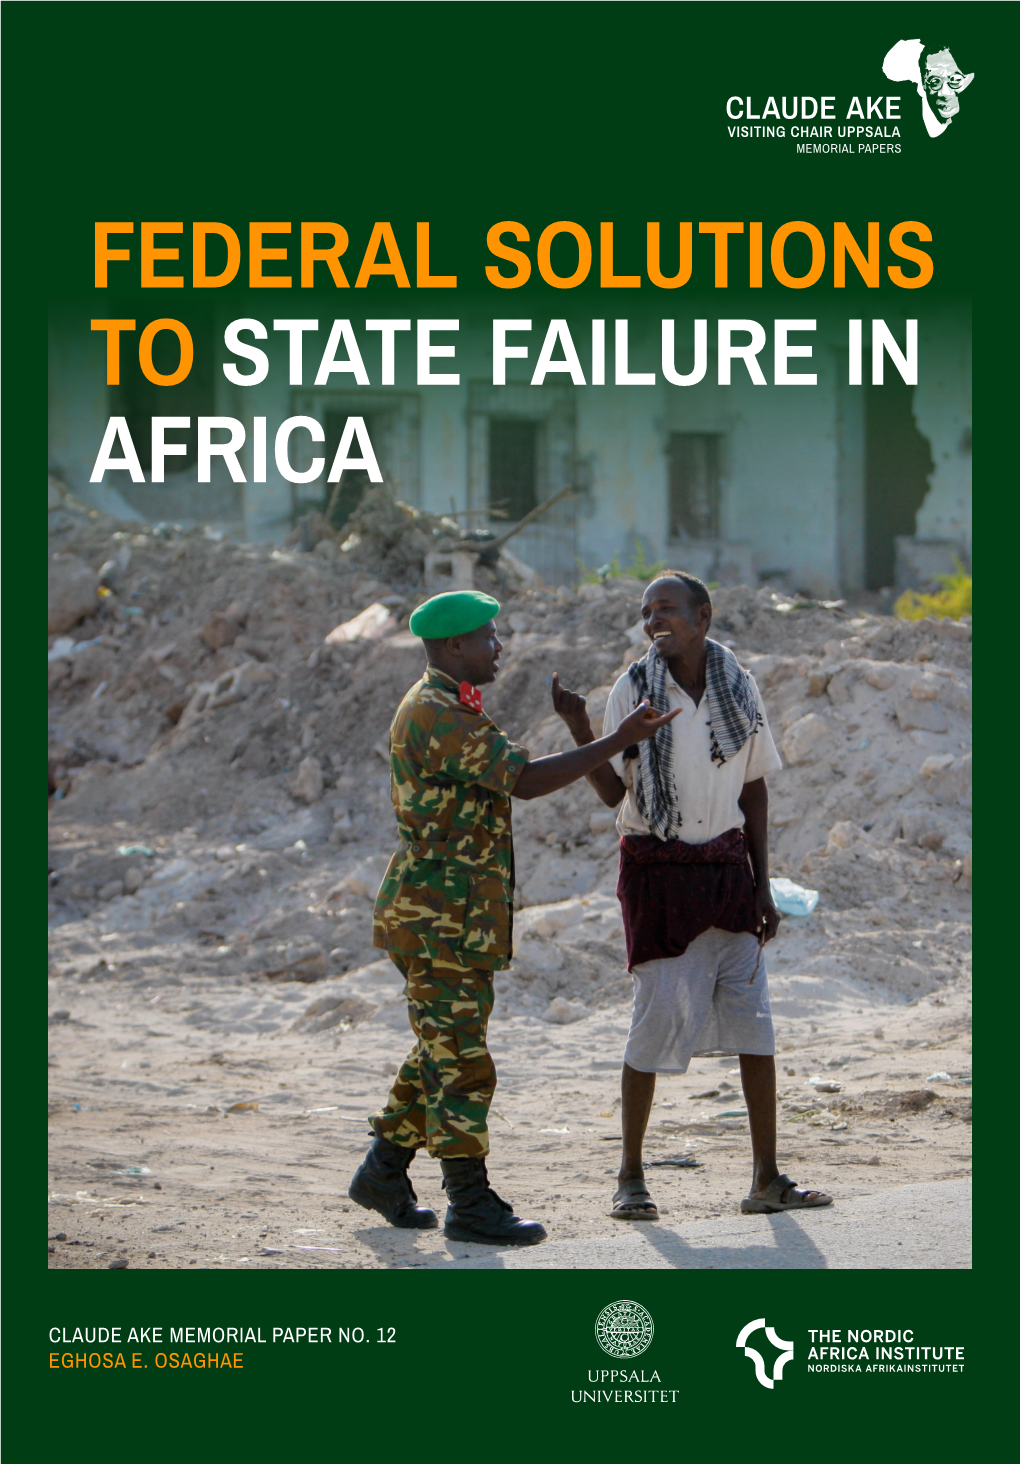 Federal Solutions to State Failure in Africa. Claude Ake Memorial Papers No